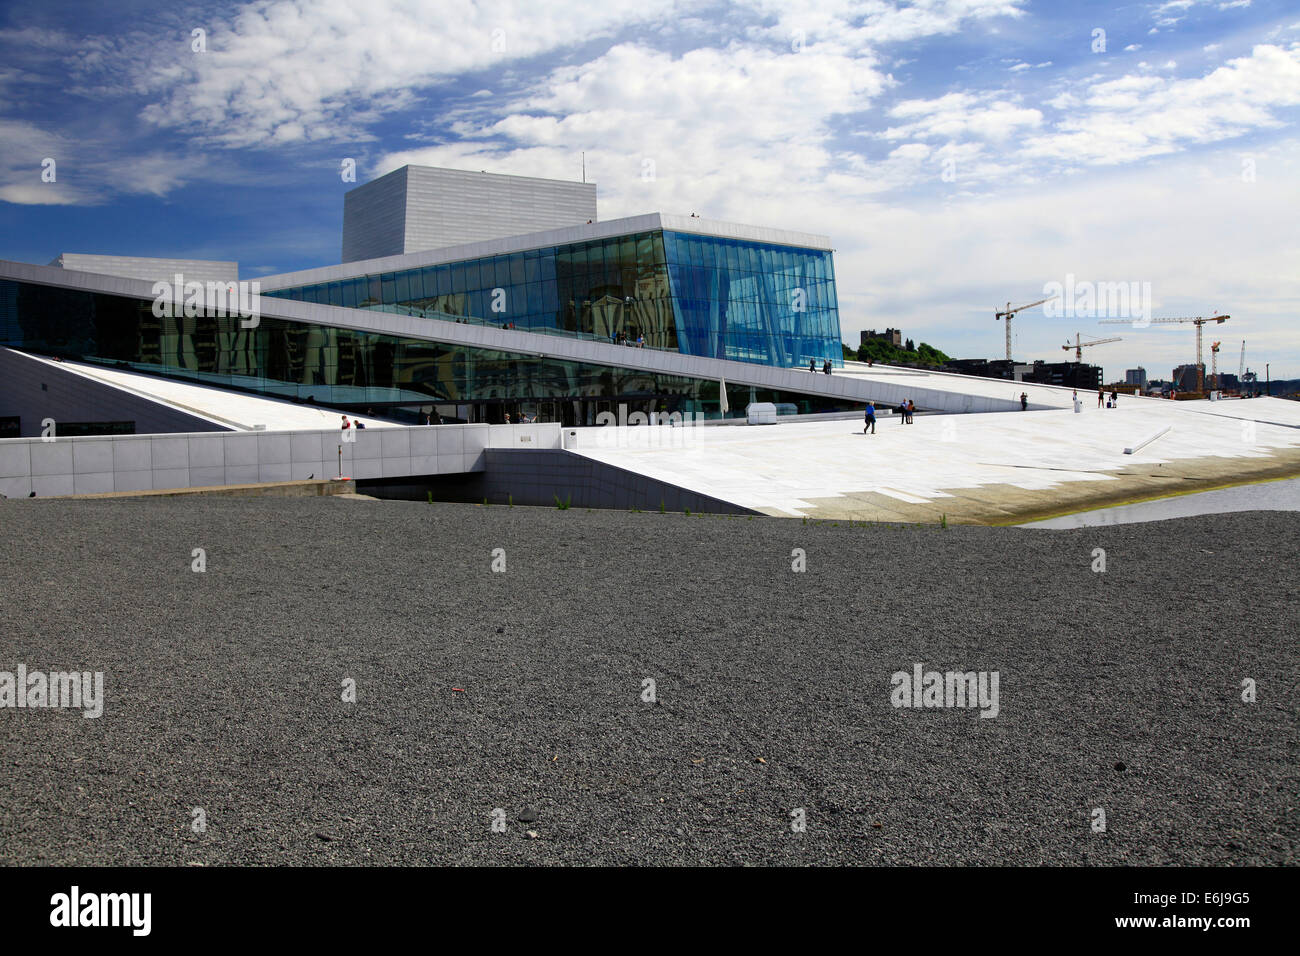 The new Oslo Opera House opened in 2008 and it is the largest Norwegian culture project. The building is modeled on a drifting iceberg. It is 110 m wide, 207 m long. Photo: Klaus Nowottnick Date: June 3, 2014 Stock Photo